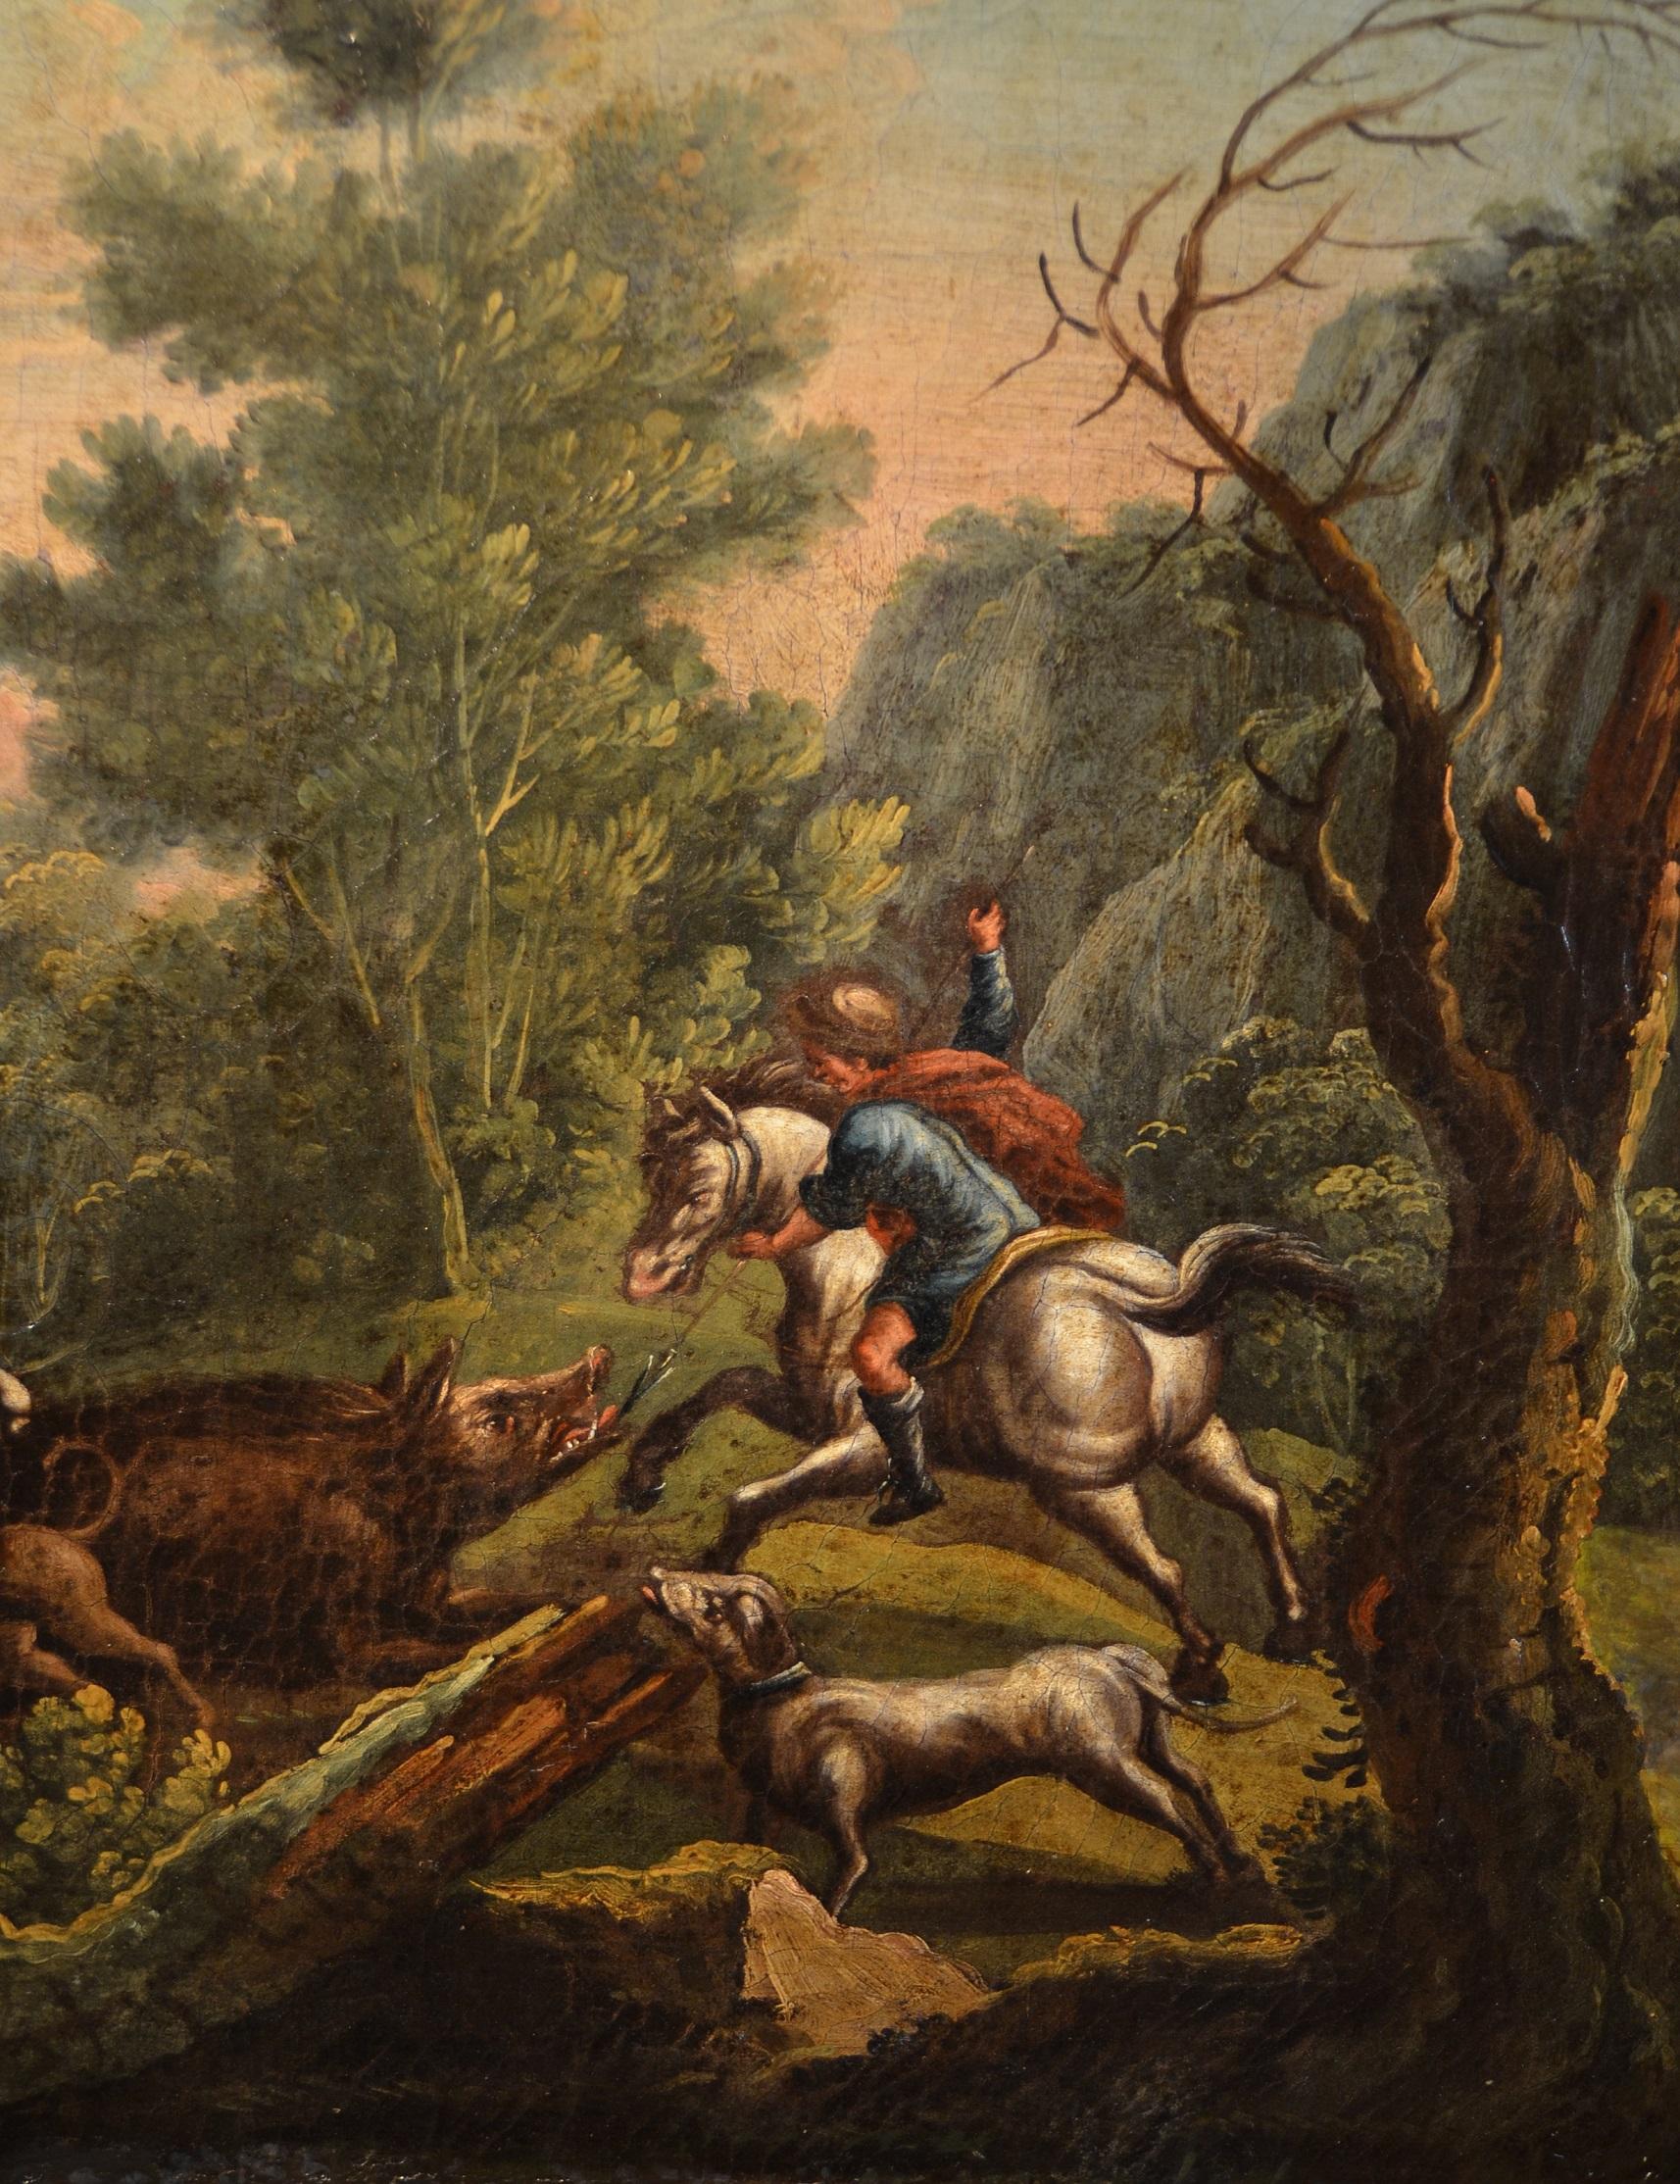 Piedmontese painter of the eighteenth century
Pendant of paintings
Landscape with wild boar hunting scene
Landscape with pastoral scene

Oil on canvas, 66 x 132 cm, framed 68 x 134

We show you this pleasant pendant of paintings, characterized by a